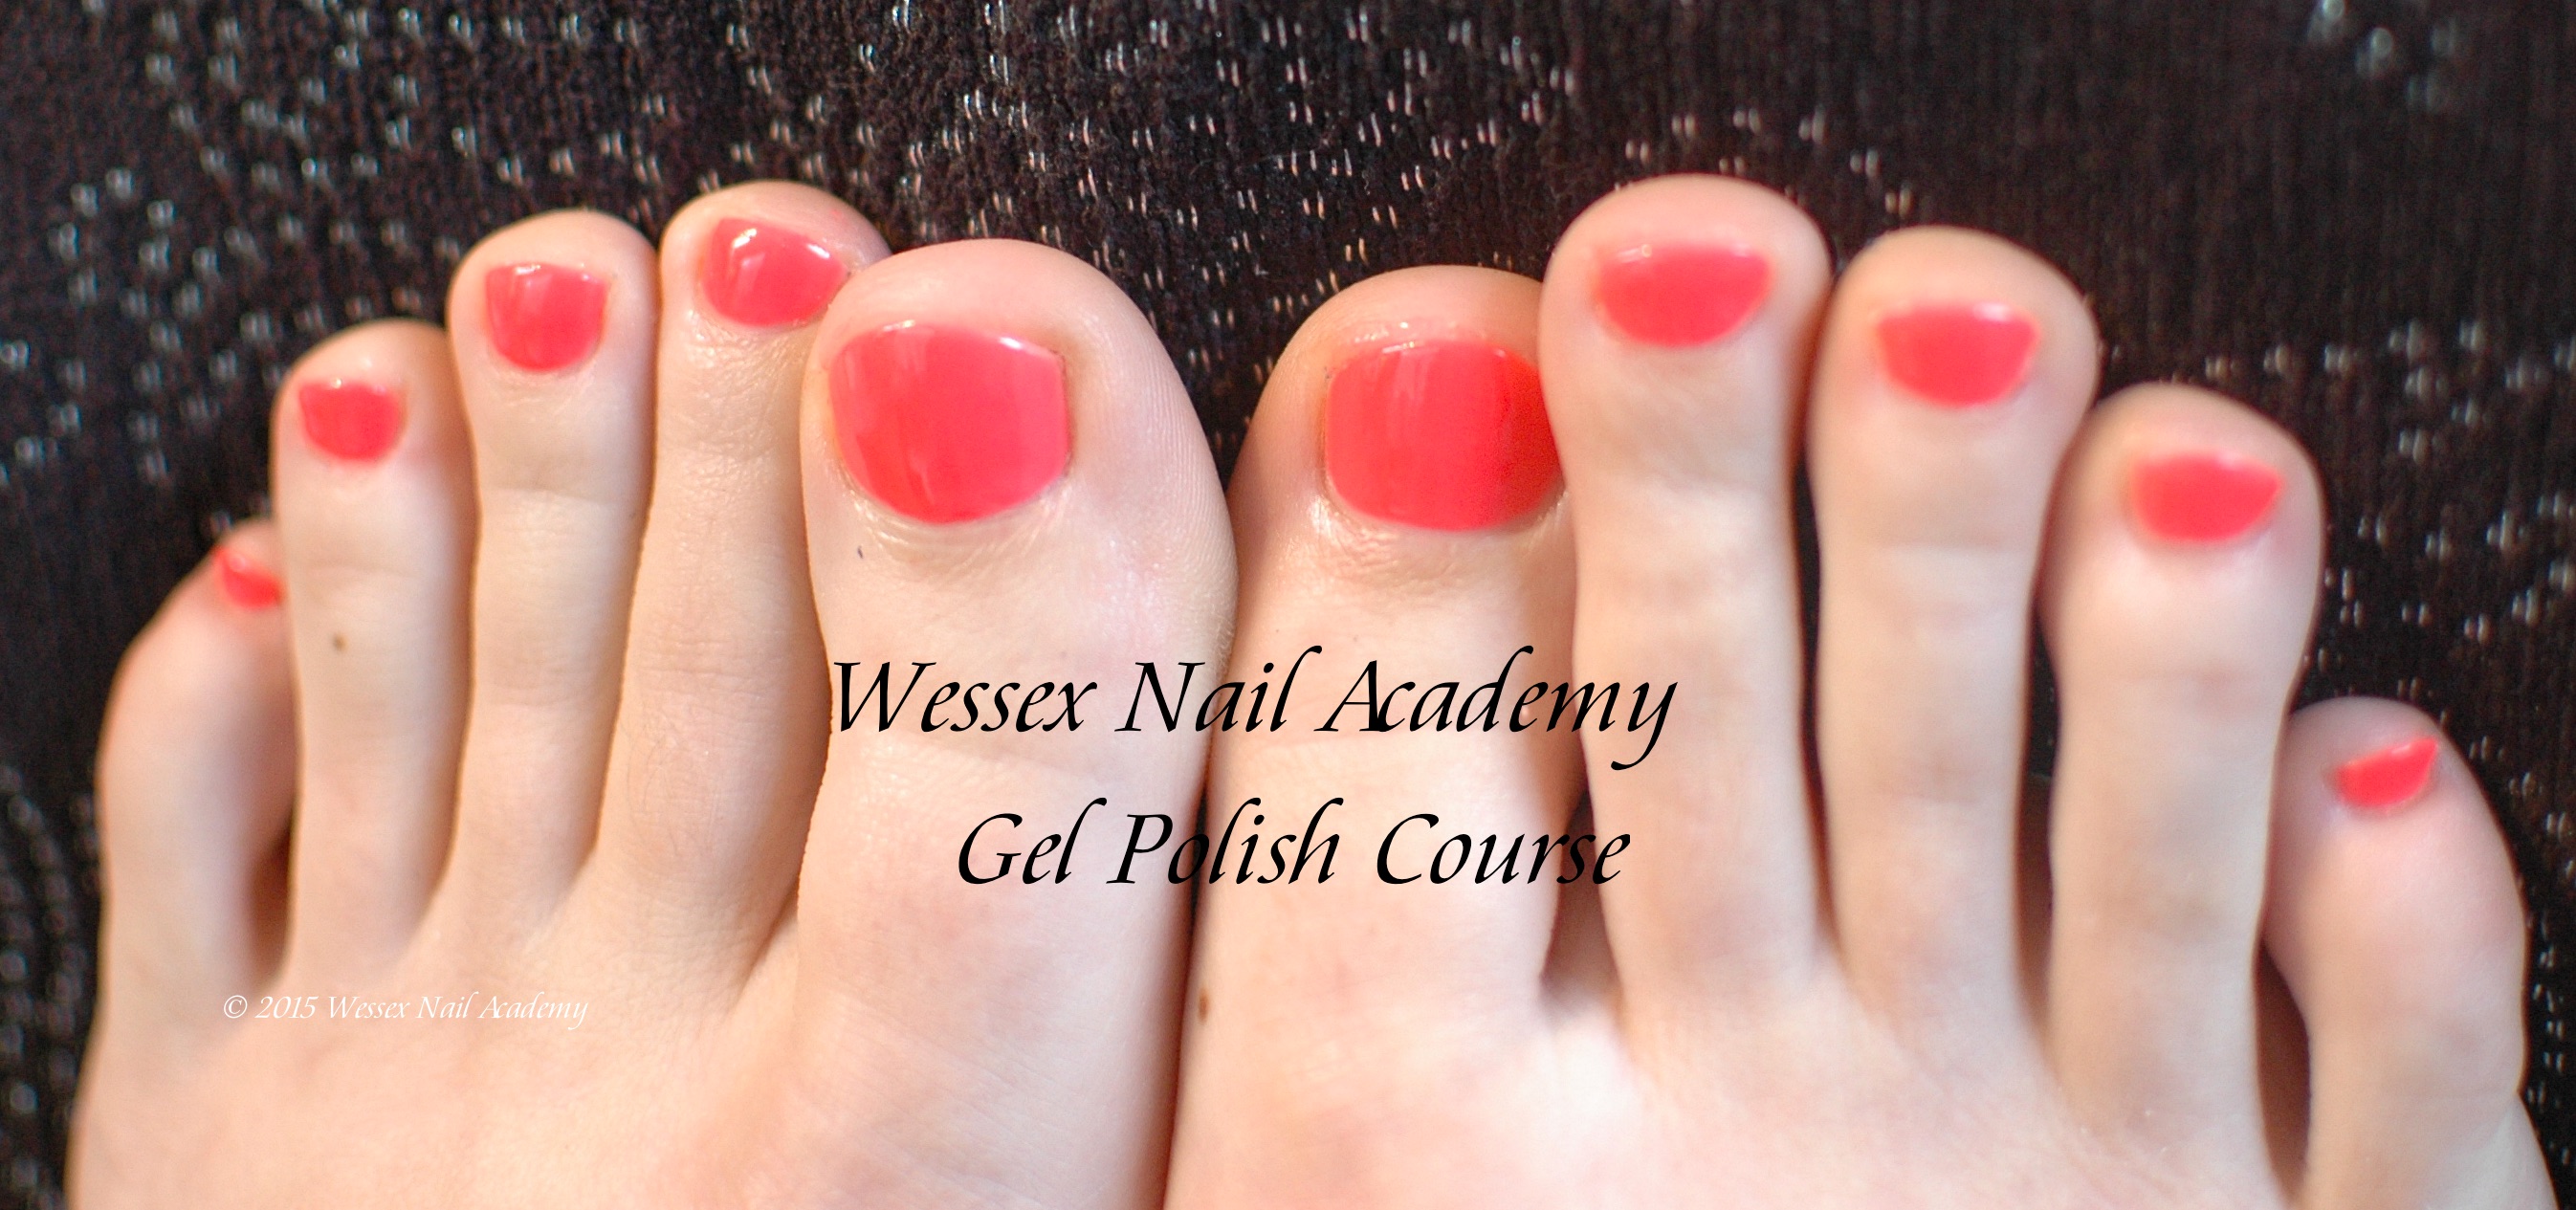 Gel Polish Beginners Pedicure Students Work,Nail extension training , nail training course, Okeford Fitzpaine, Dorset